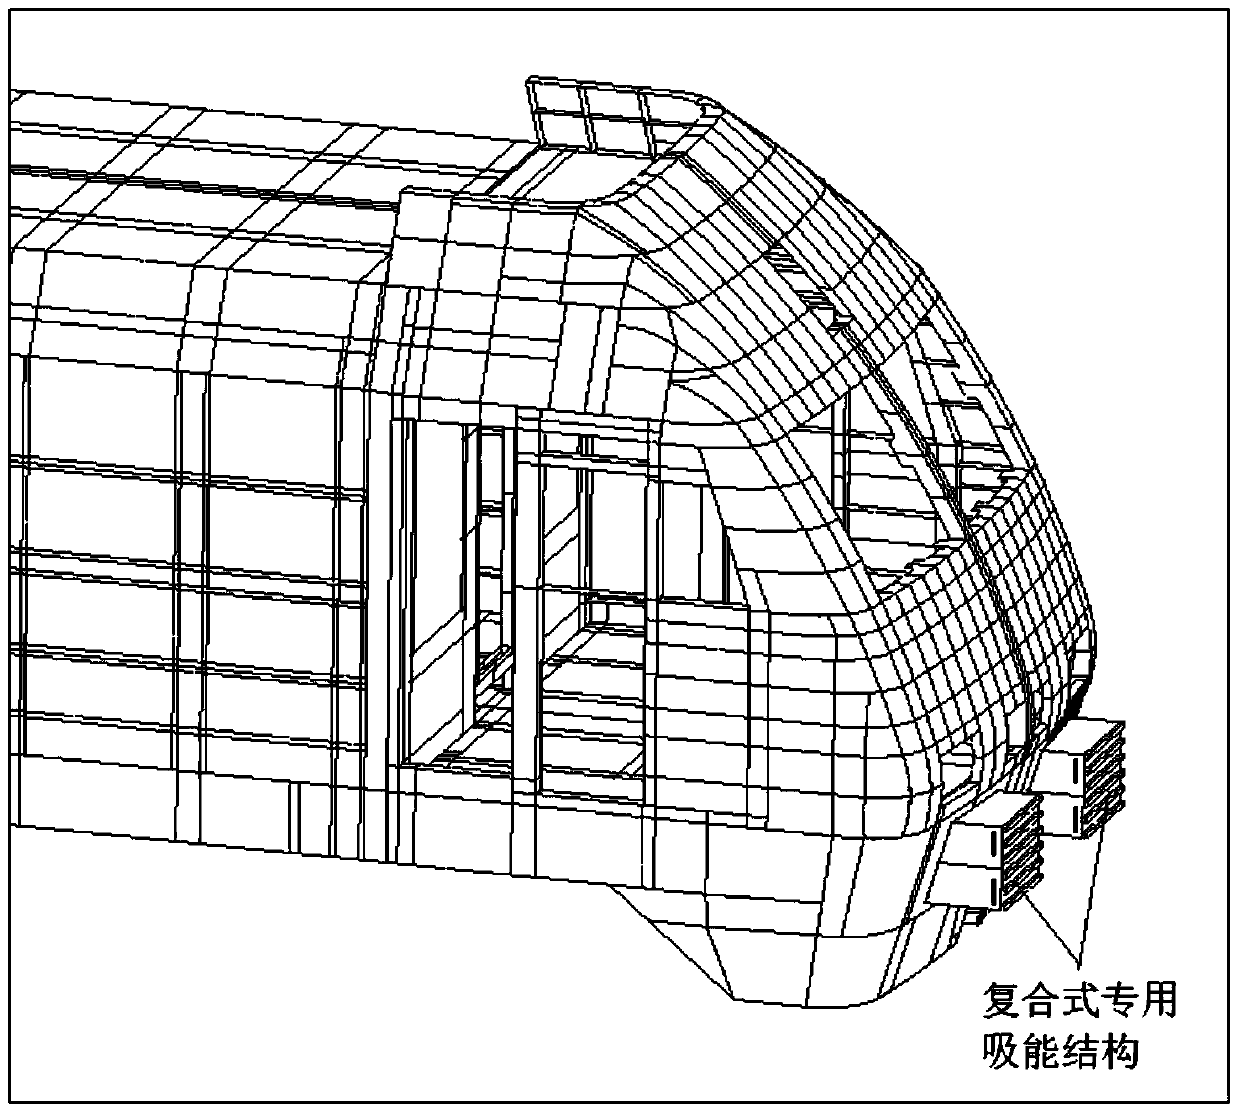 Guidance composite special energy-absorbing structure and its application on trains